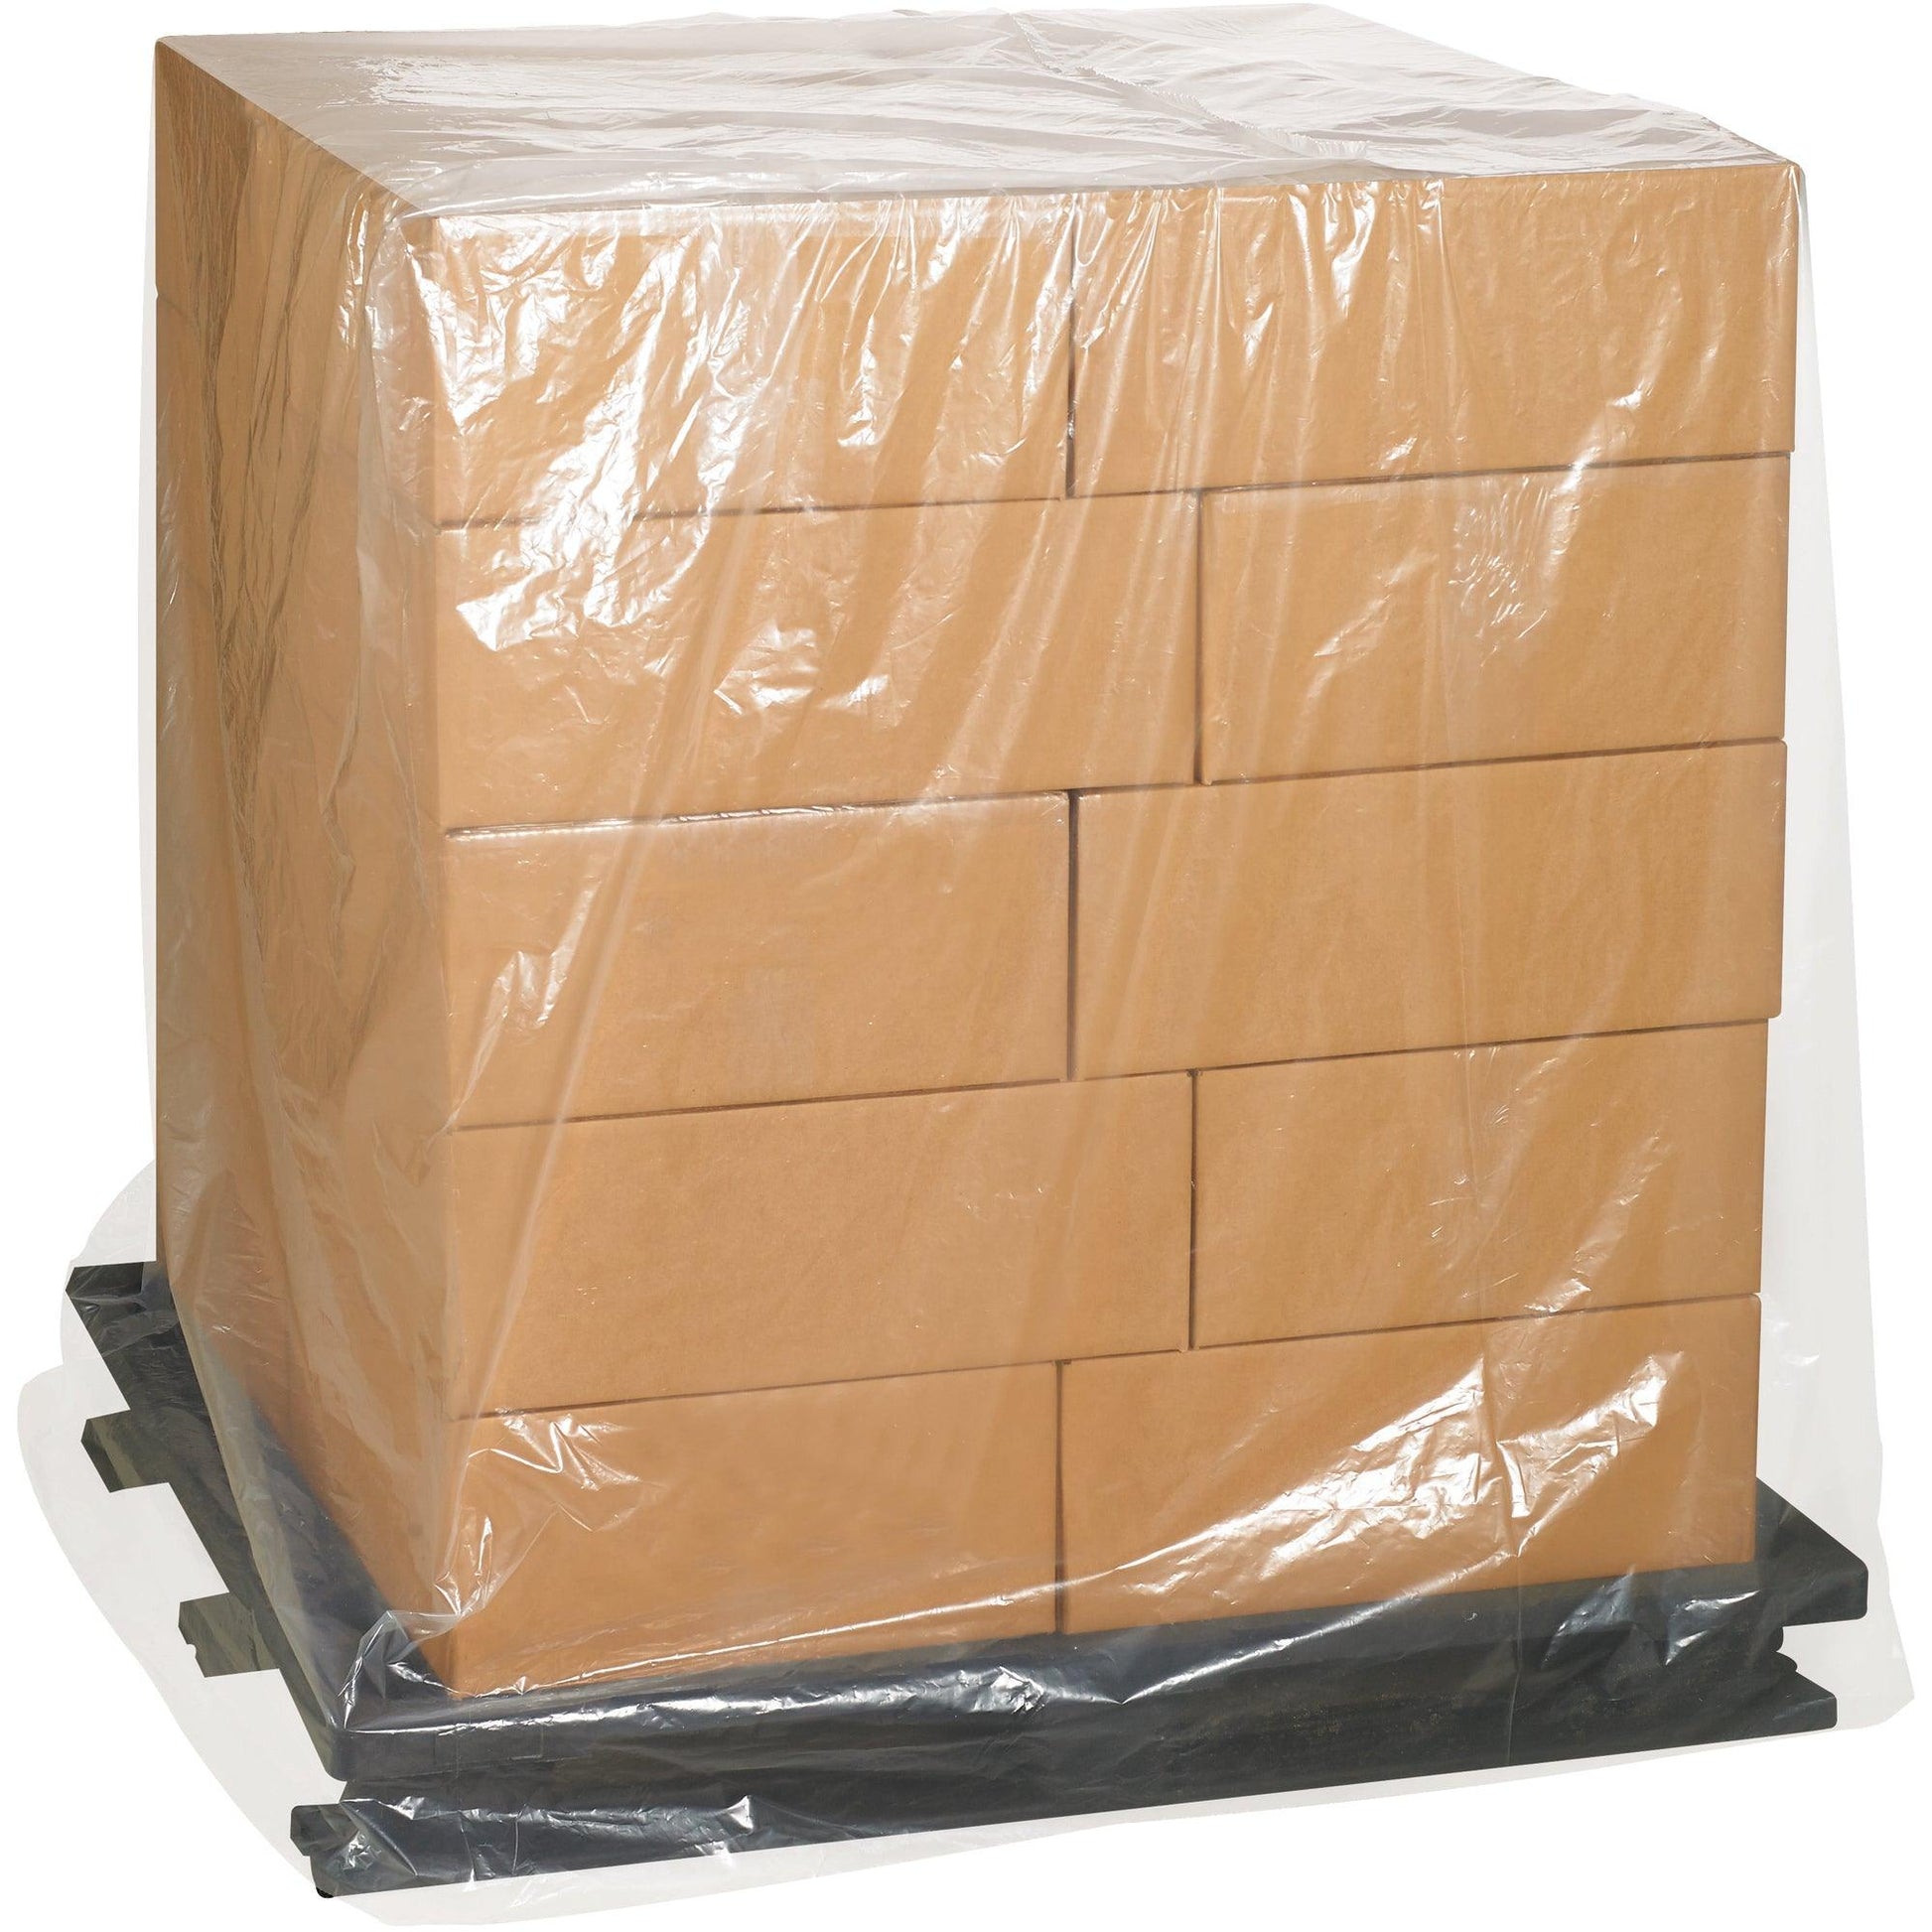 52 x 48 x 96" - 4 Mil Clear Pallet Covers - PC475